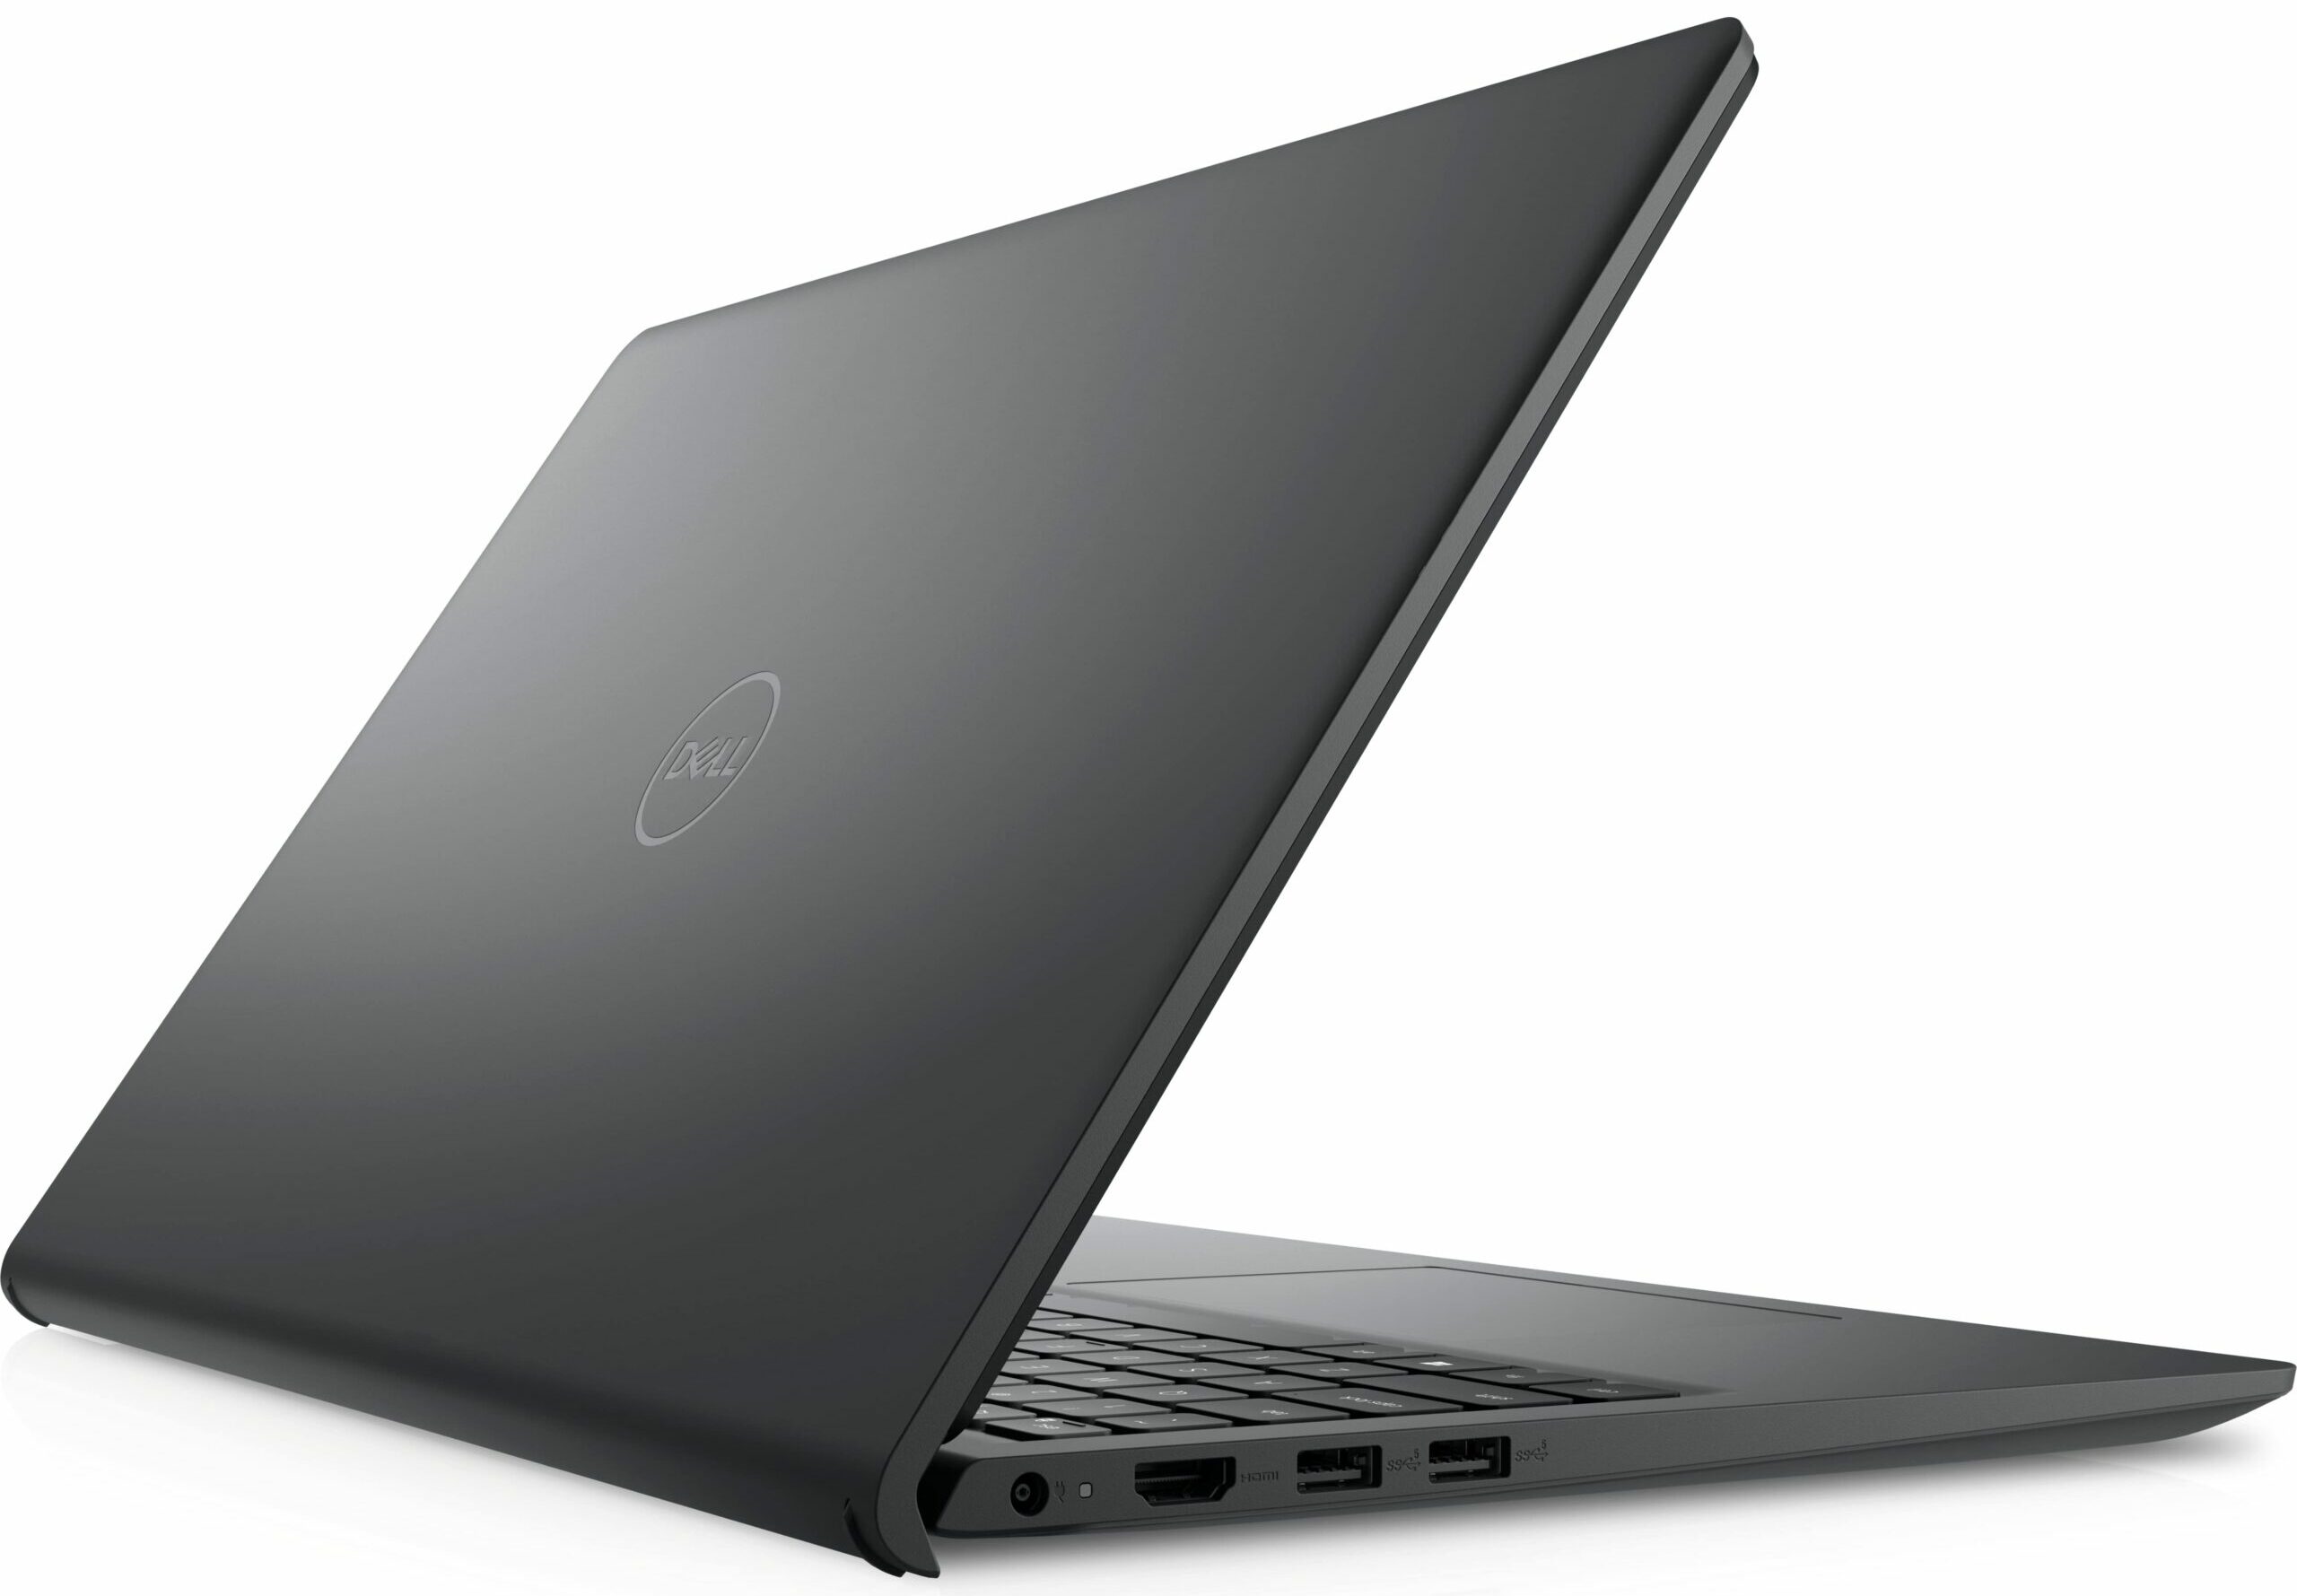 Dell Inspiron 15 3525 - Specs, Tests, and Prices | LaptopMedia.com